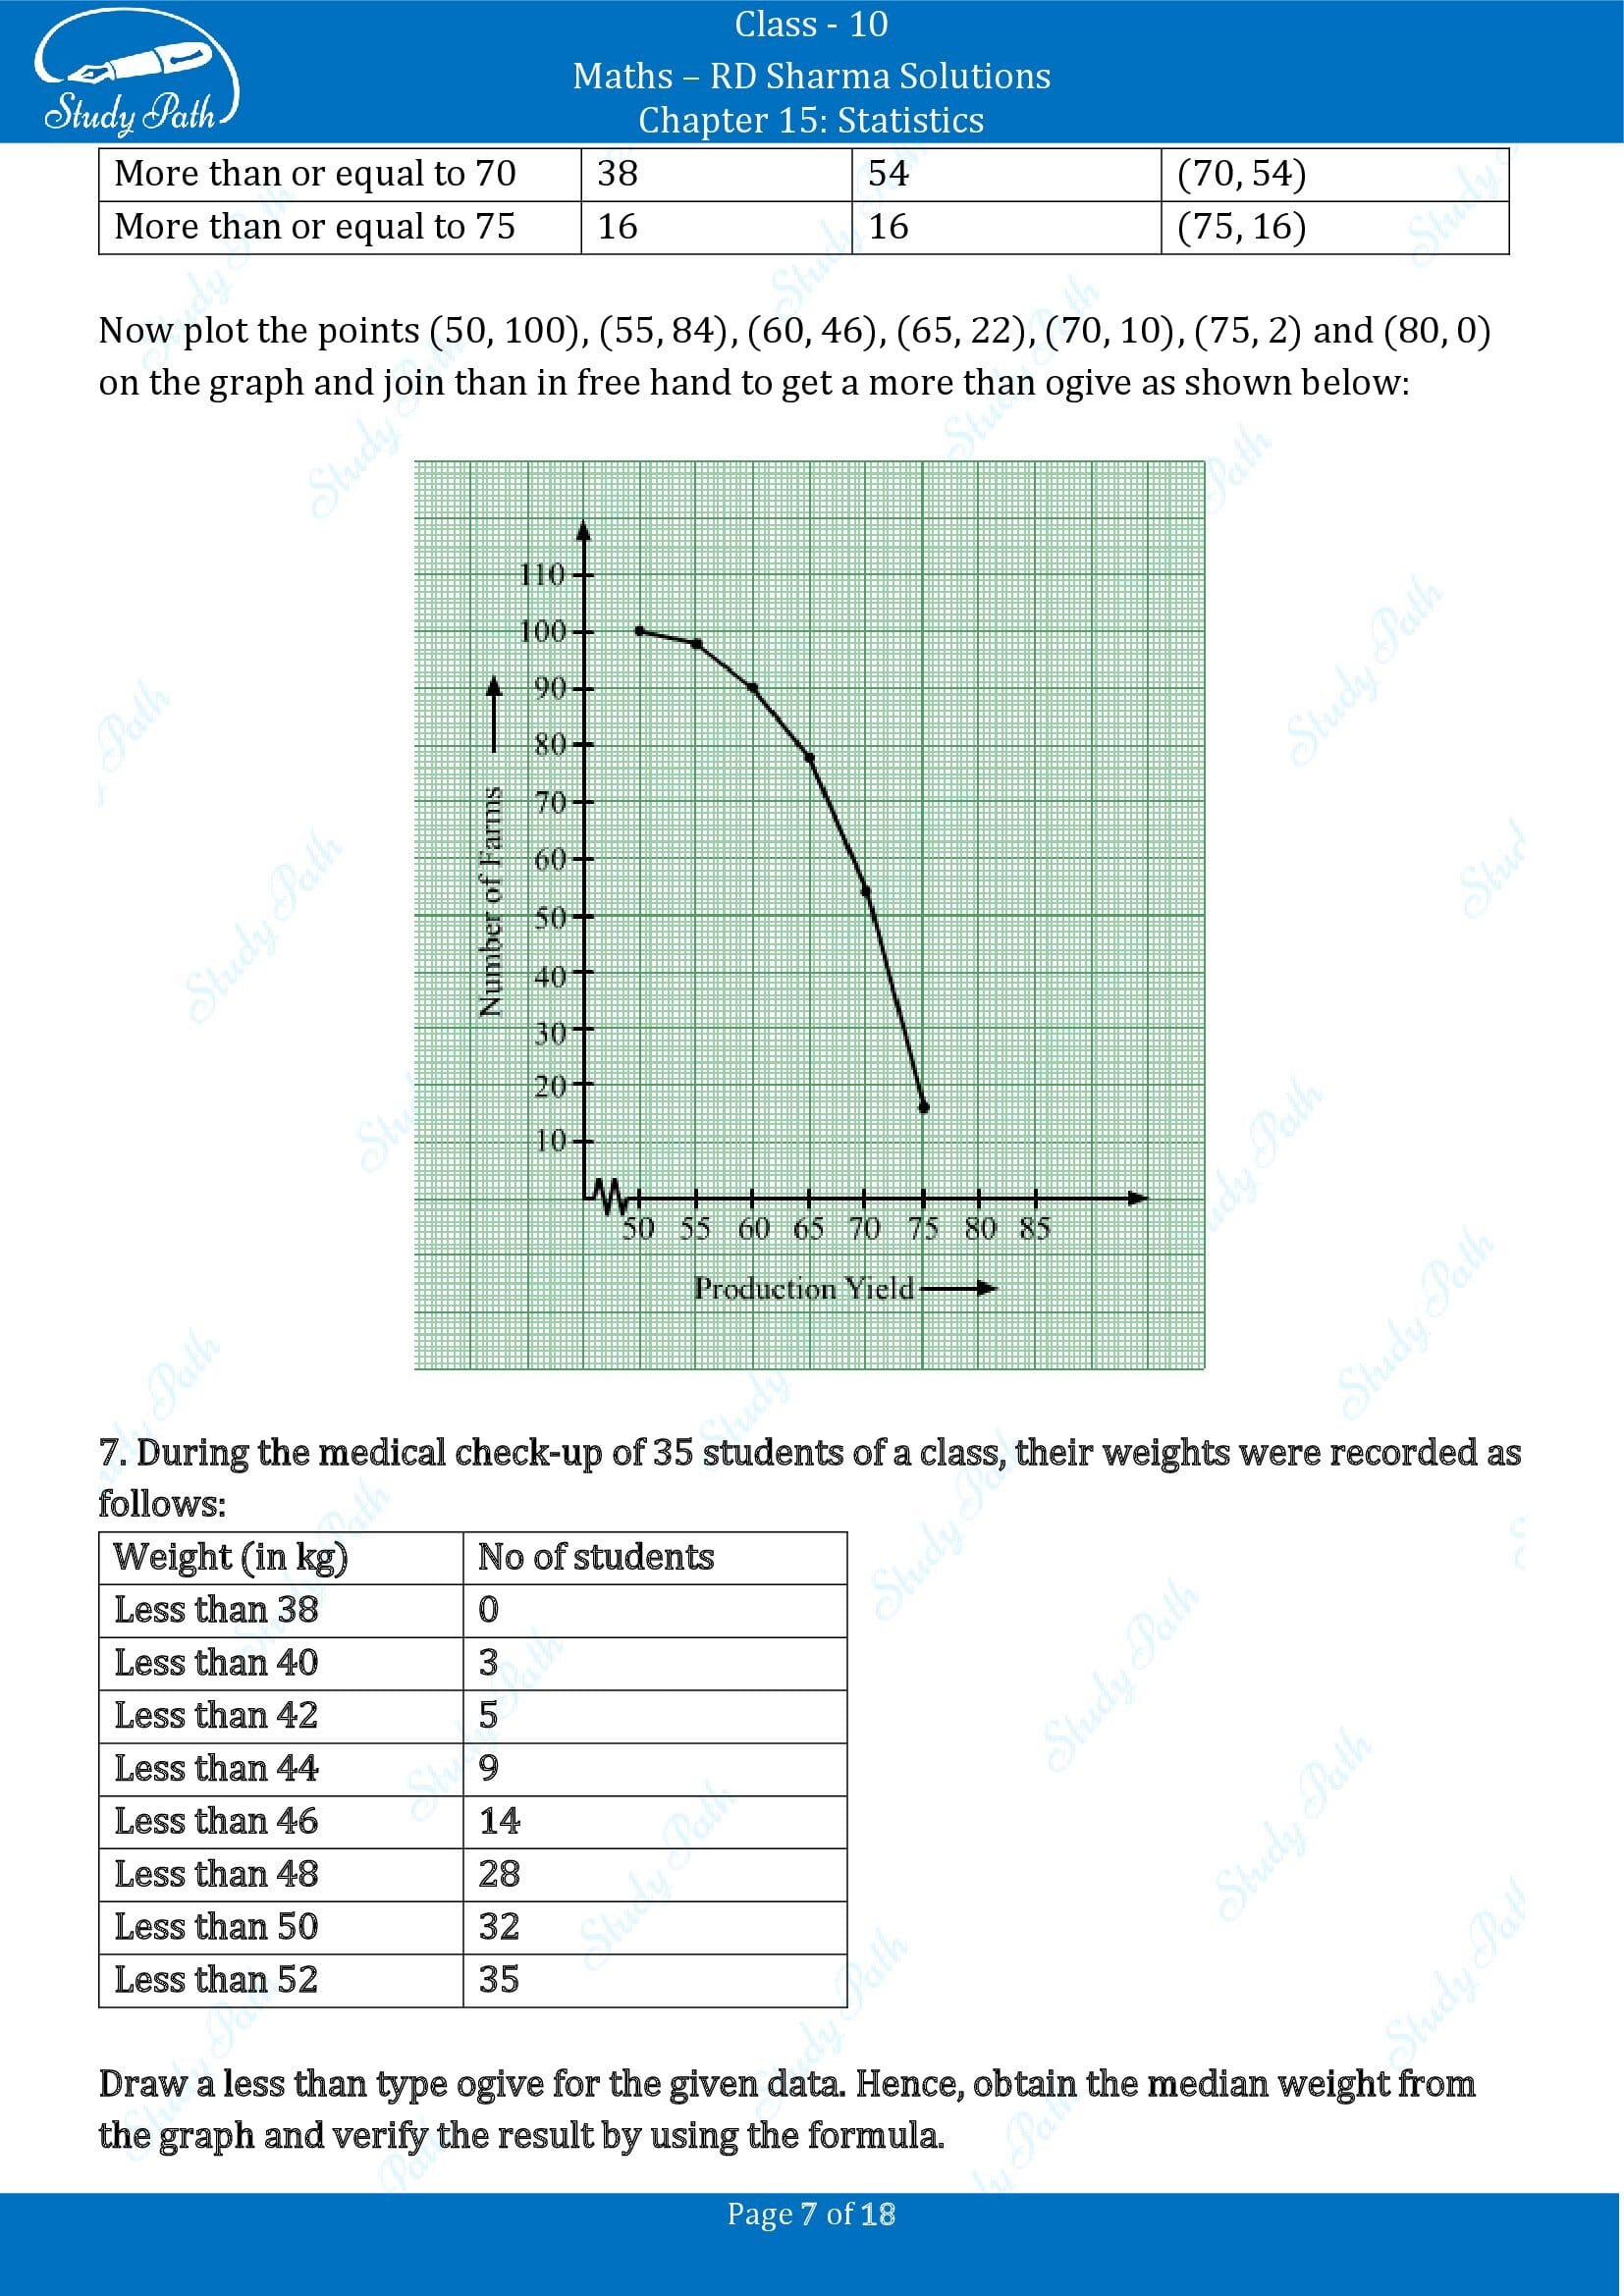 RD Sharma Solutions Class 10 Chapter 15 Statistics Exercise 15.6 00007